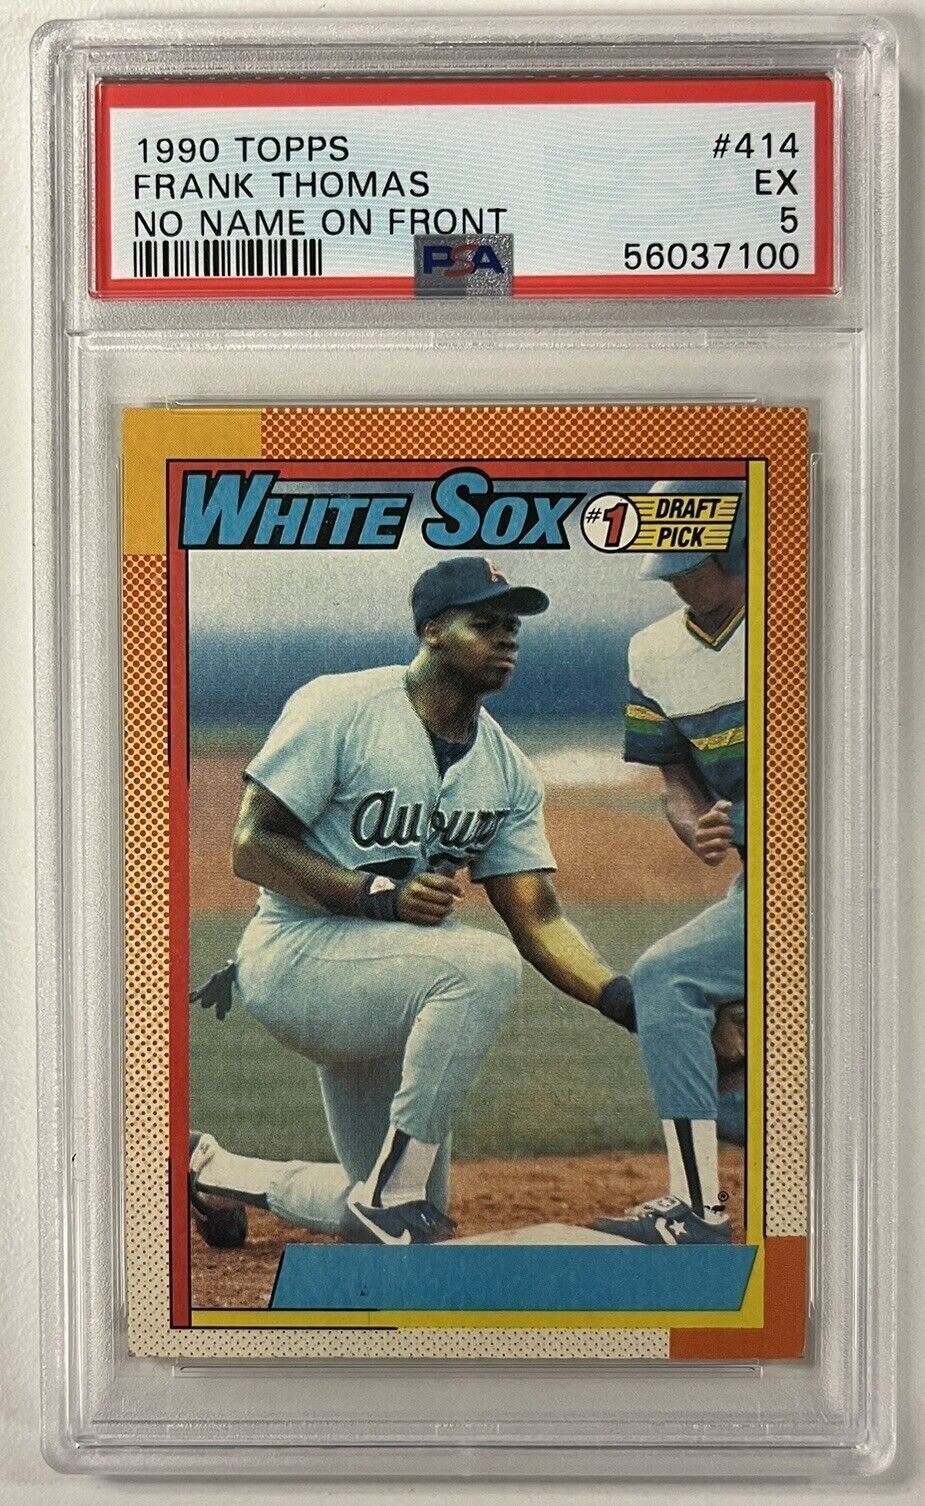 1990 Topps #414 Frank Thomas RC Rookie No Name On Front NNOF Variation PSA 5